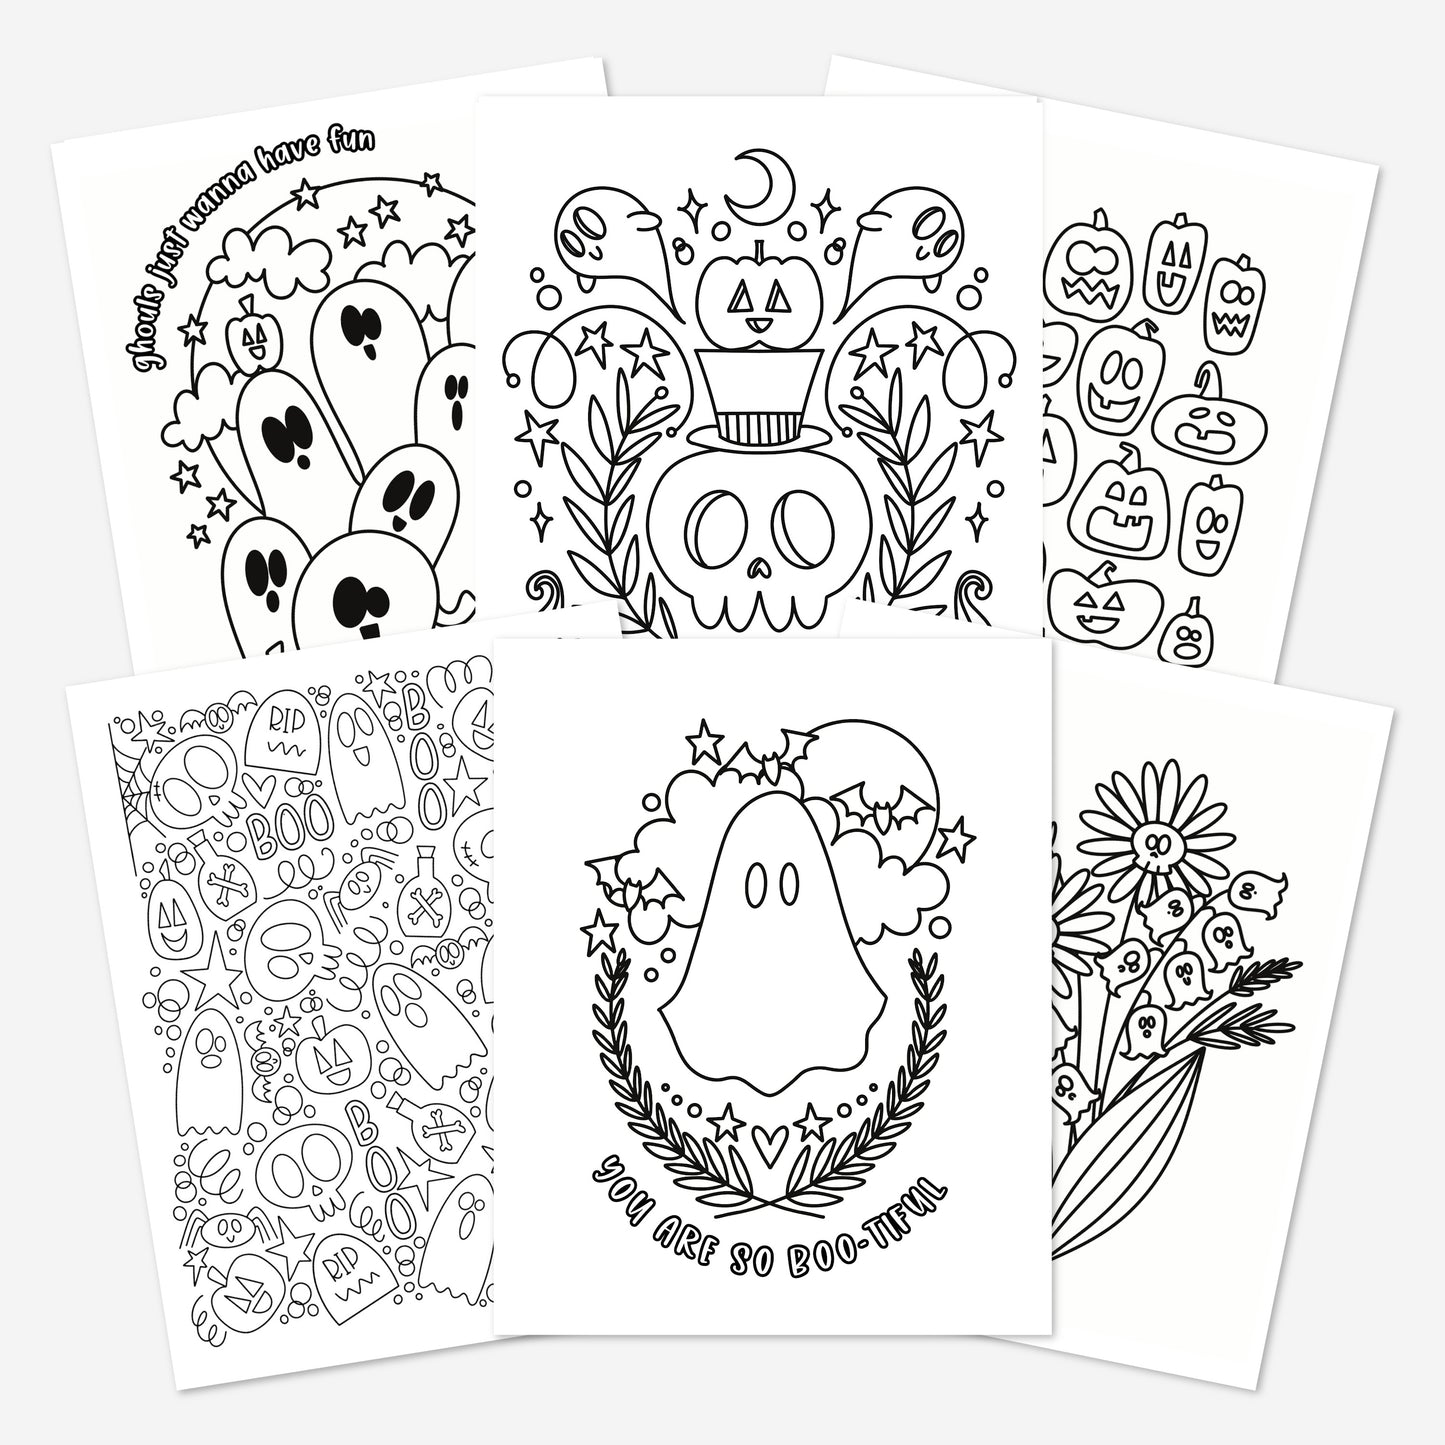 10 Pk Halloween Printable Coloring Book 10Pk Coloring Pages | Hand-Drawn Ghost Pumpkin Spooky | Creative Therapeutic Color Activity Time